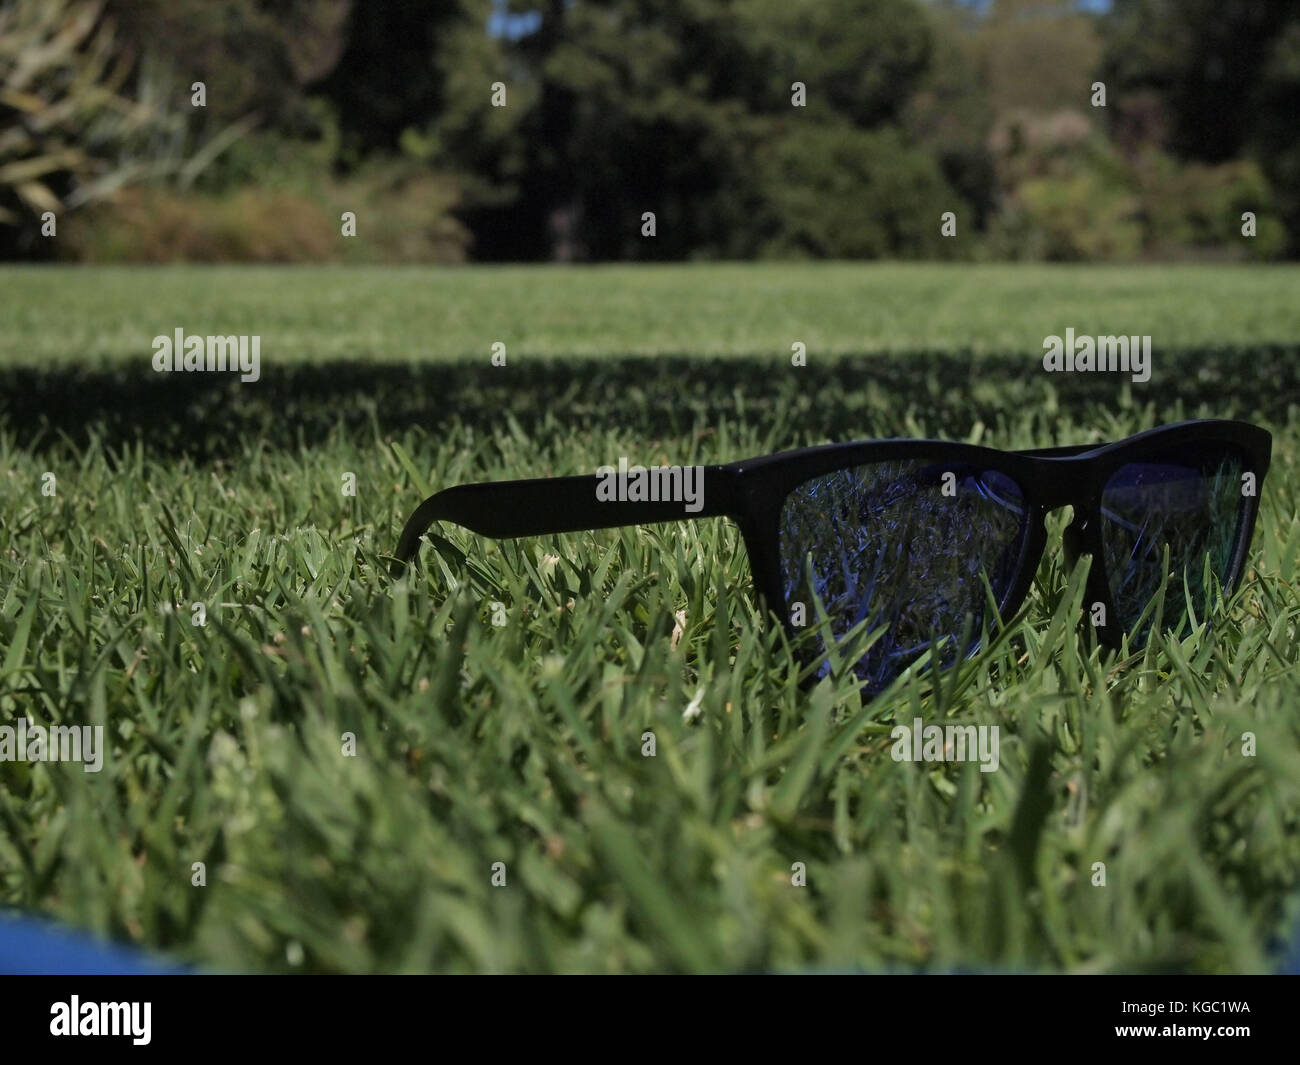 Sunglasses laying in the grass Stock Photo